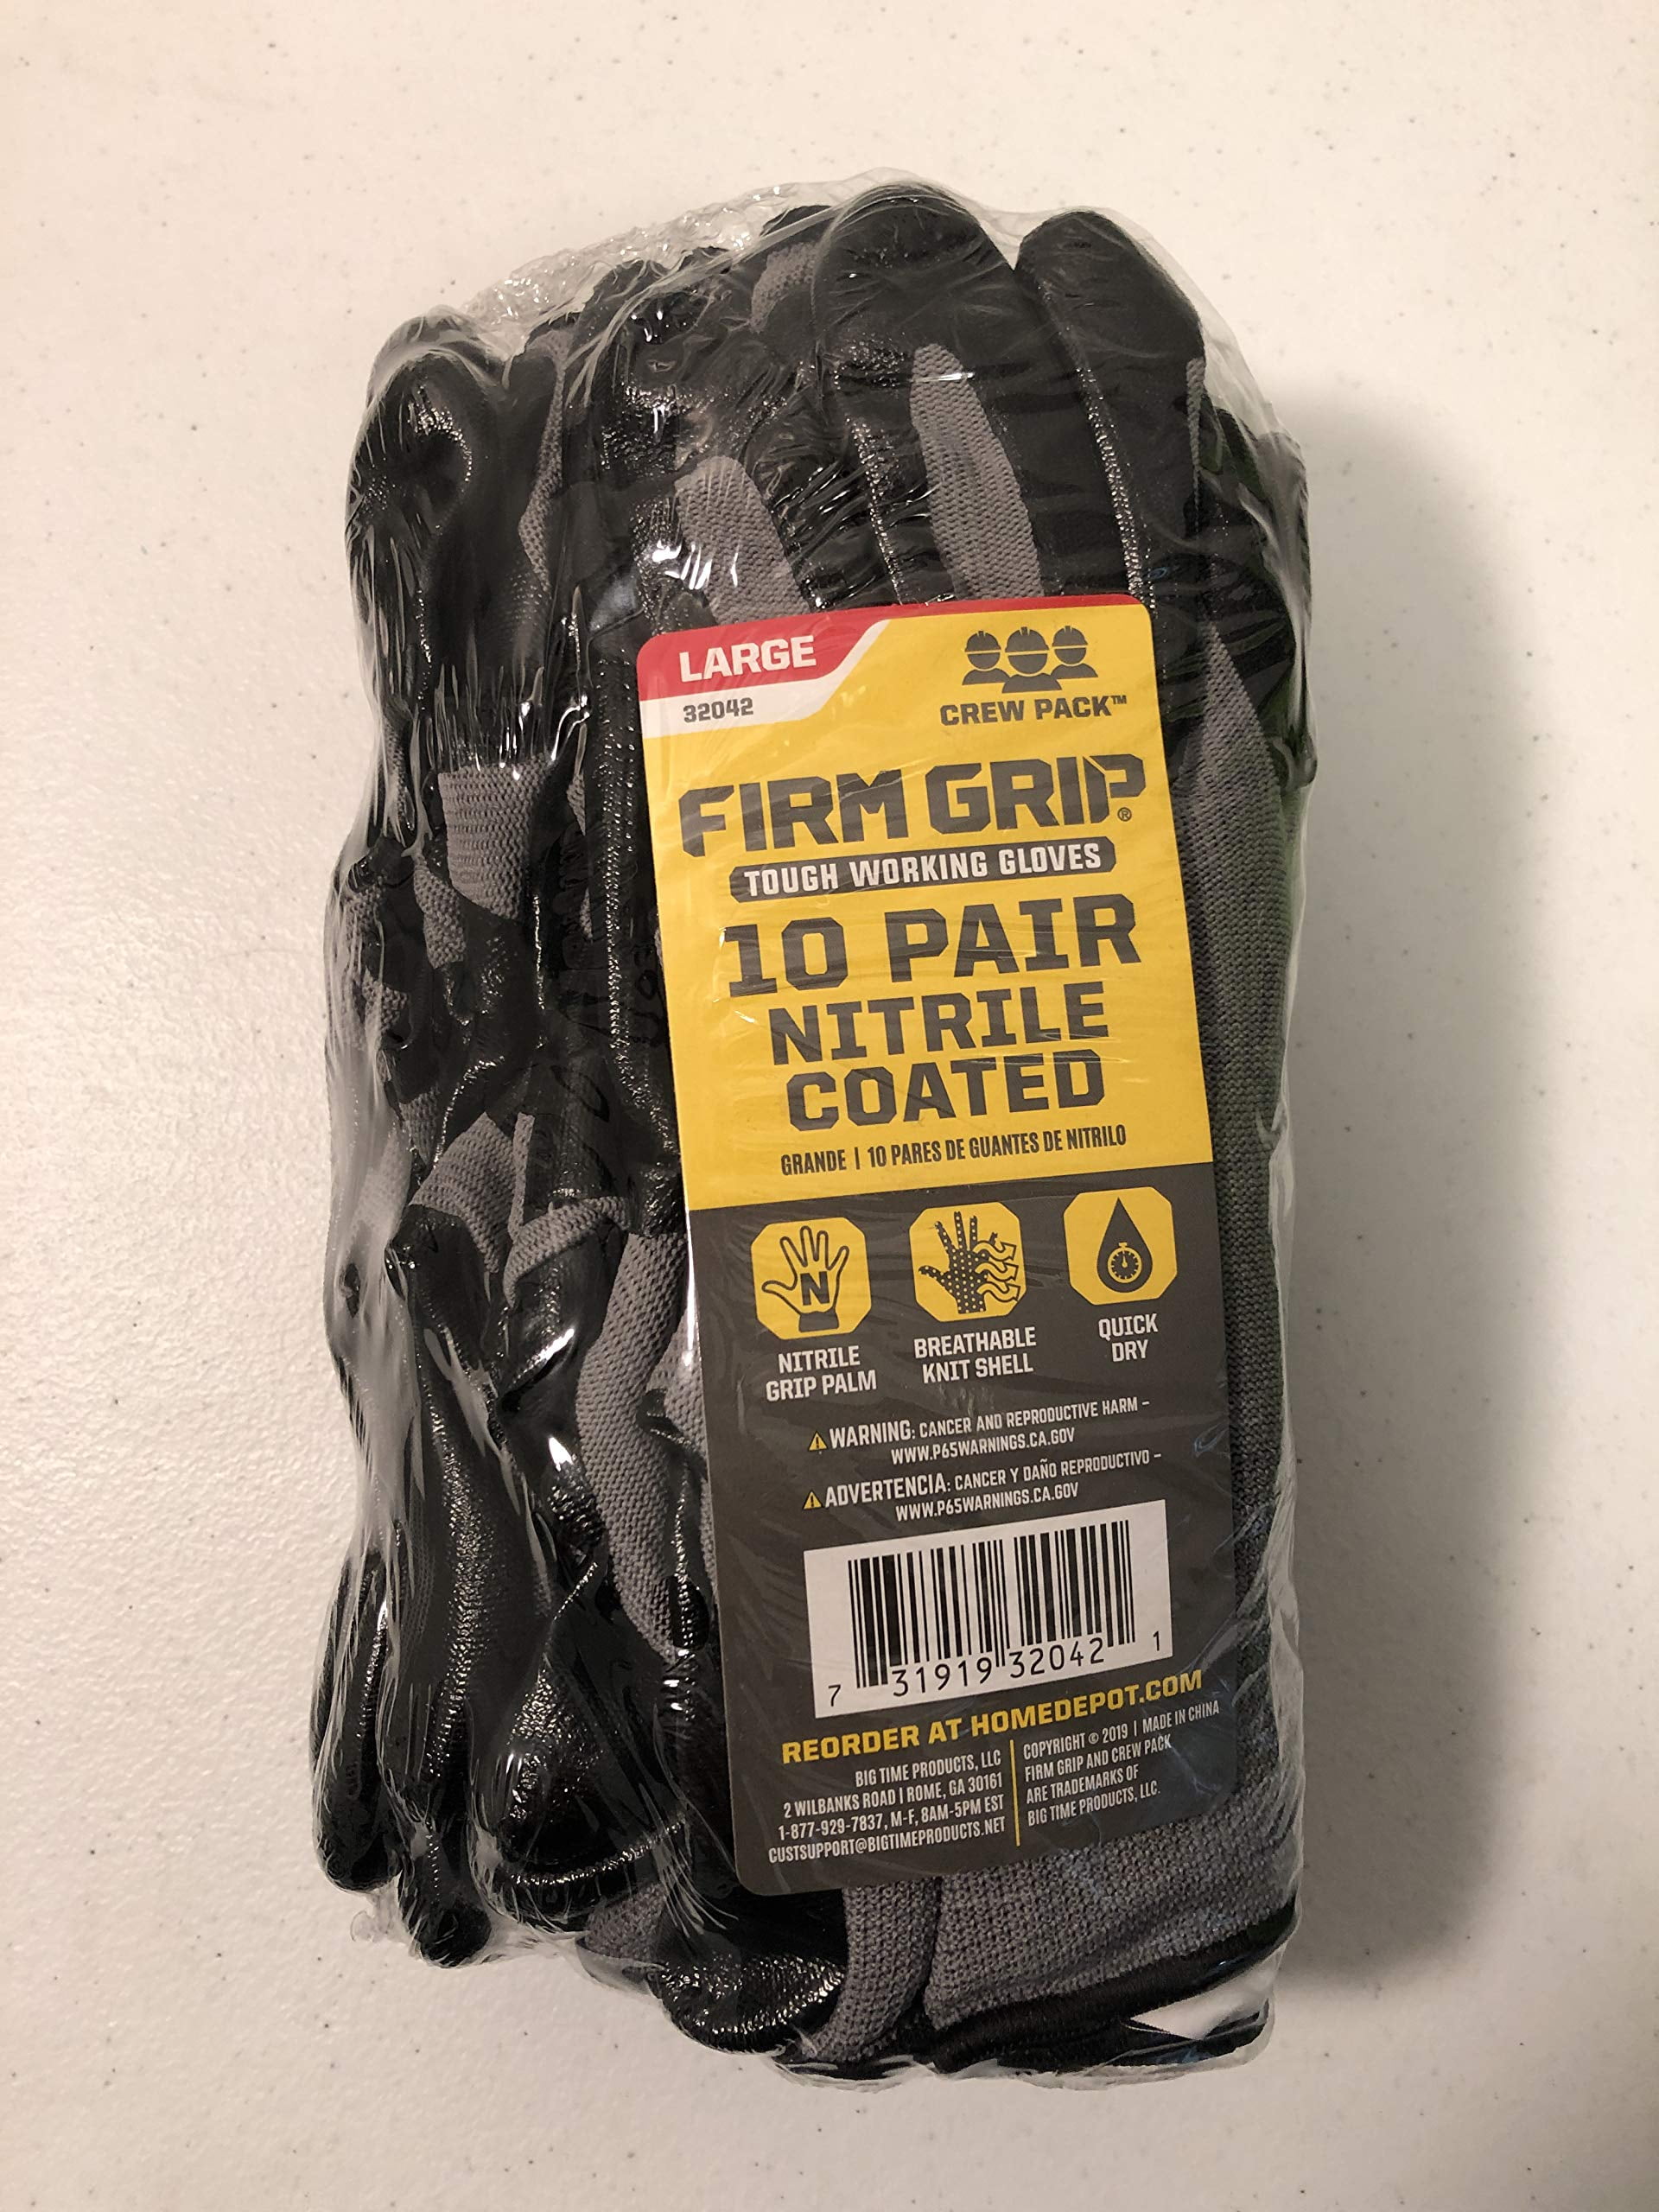 Firm Grip Nitrile Coated Gloves 10 Pair Large